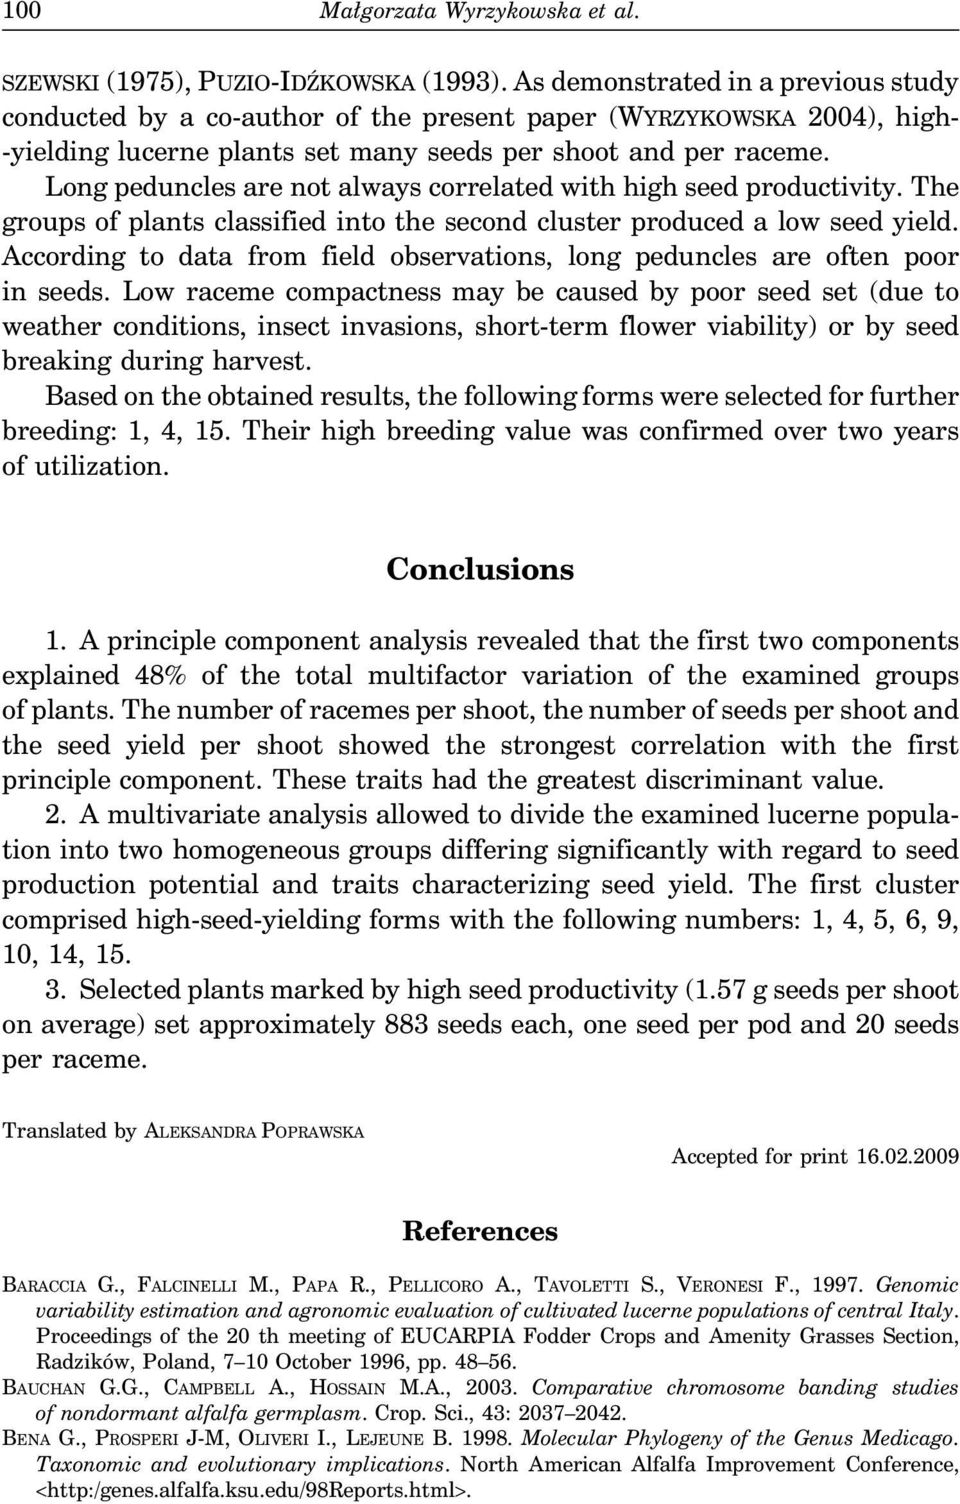 Long peduncles are not always correlated with high seed productivity. The groups of plants classified into the second cluster produced a low seed yield.